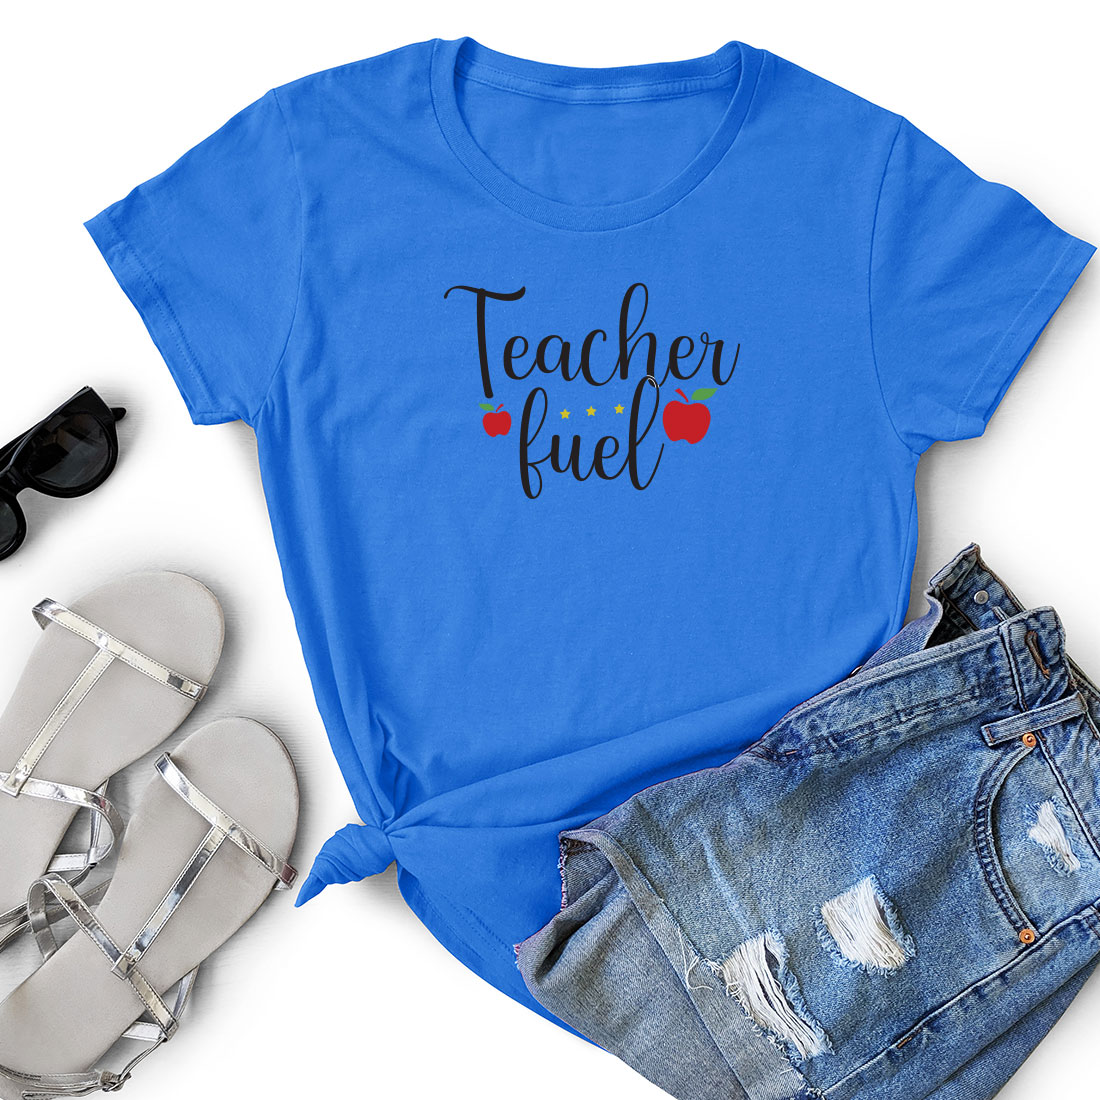 T - shirt that says teacher fuel next to a pair of shorts.